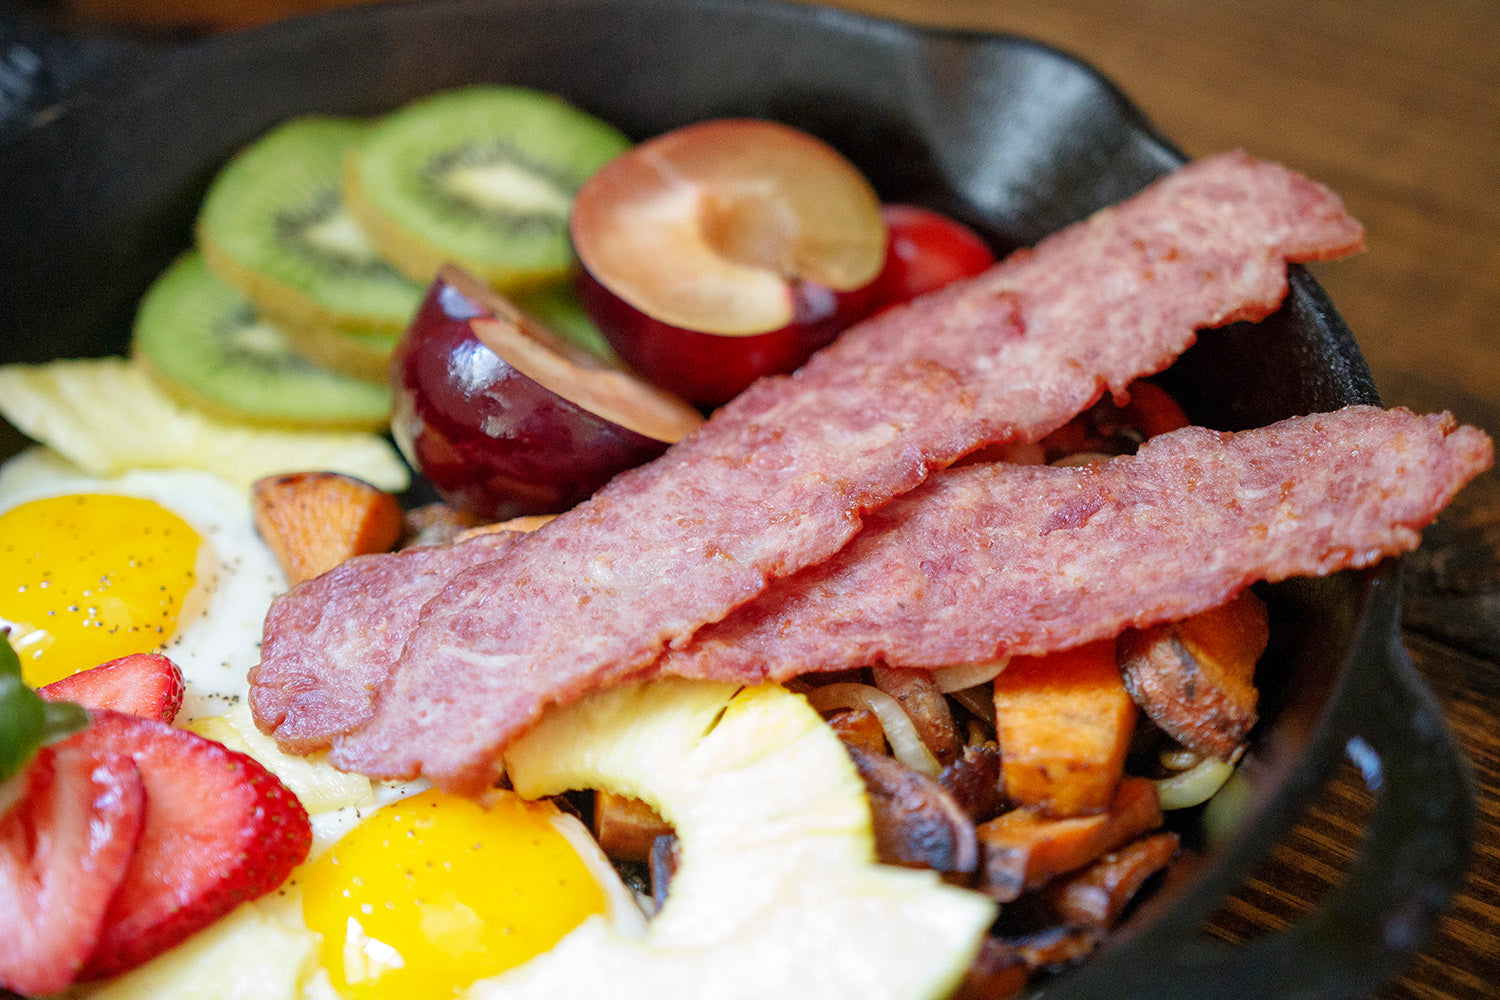 Breakfast Skillet Recipe with Turkey Bacon and Eggs